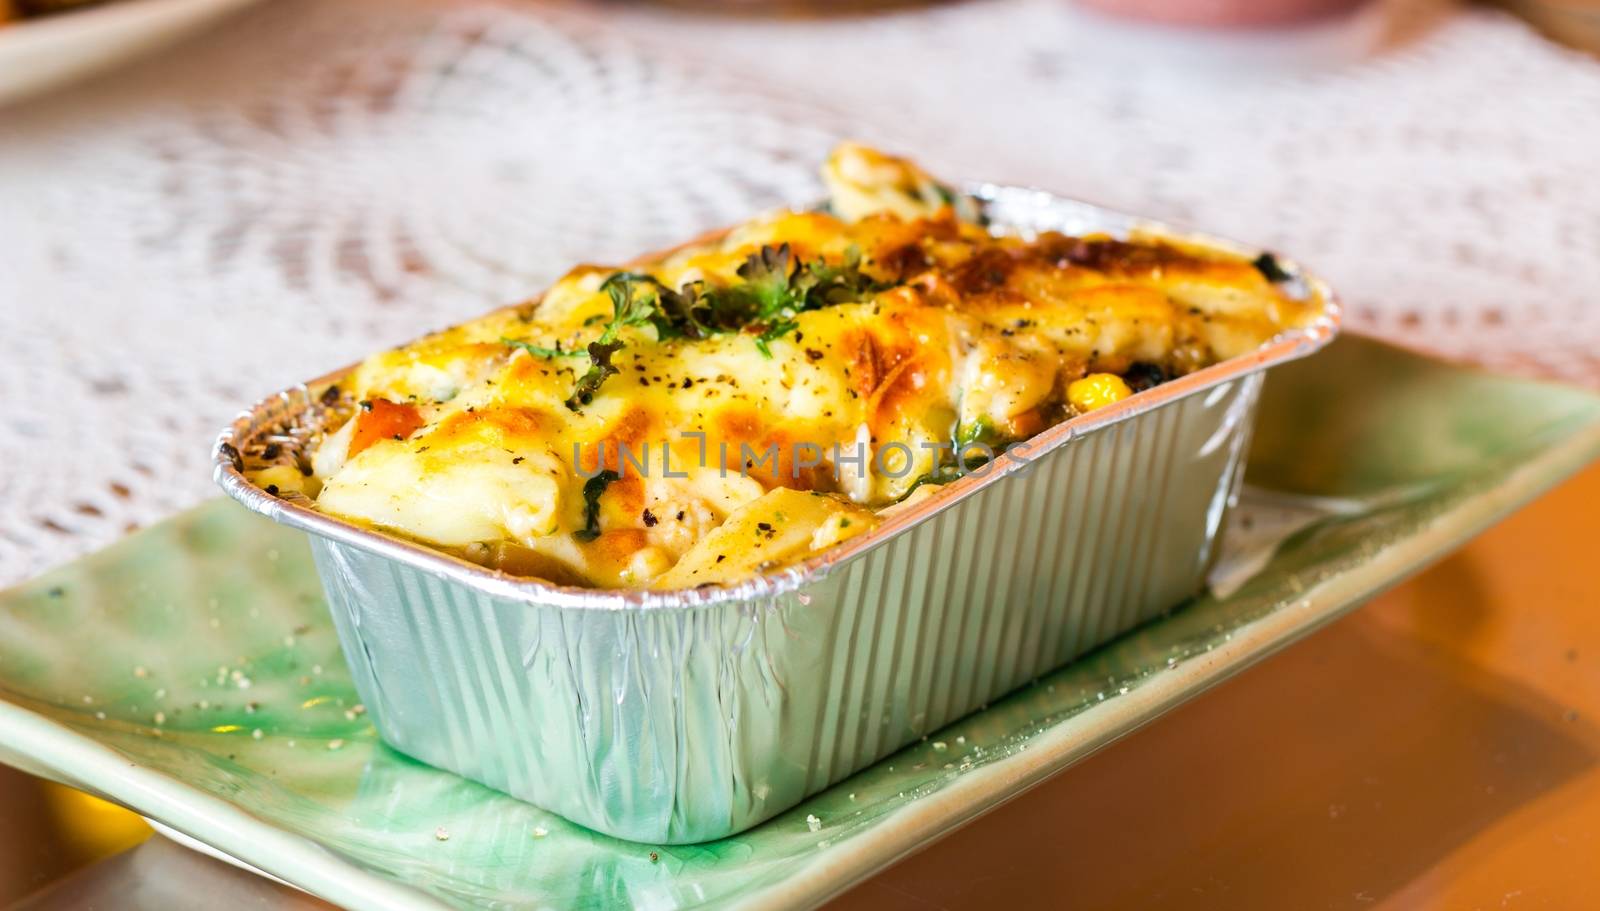 Lasagne ready meal in foil container. by a3701027